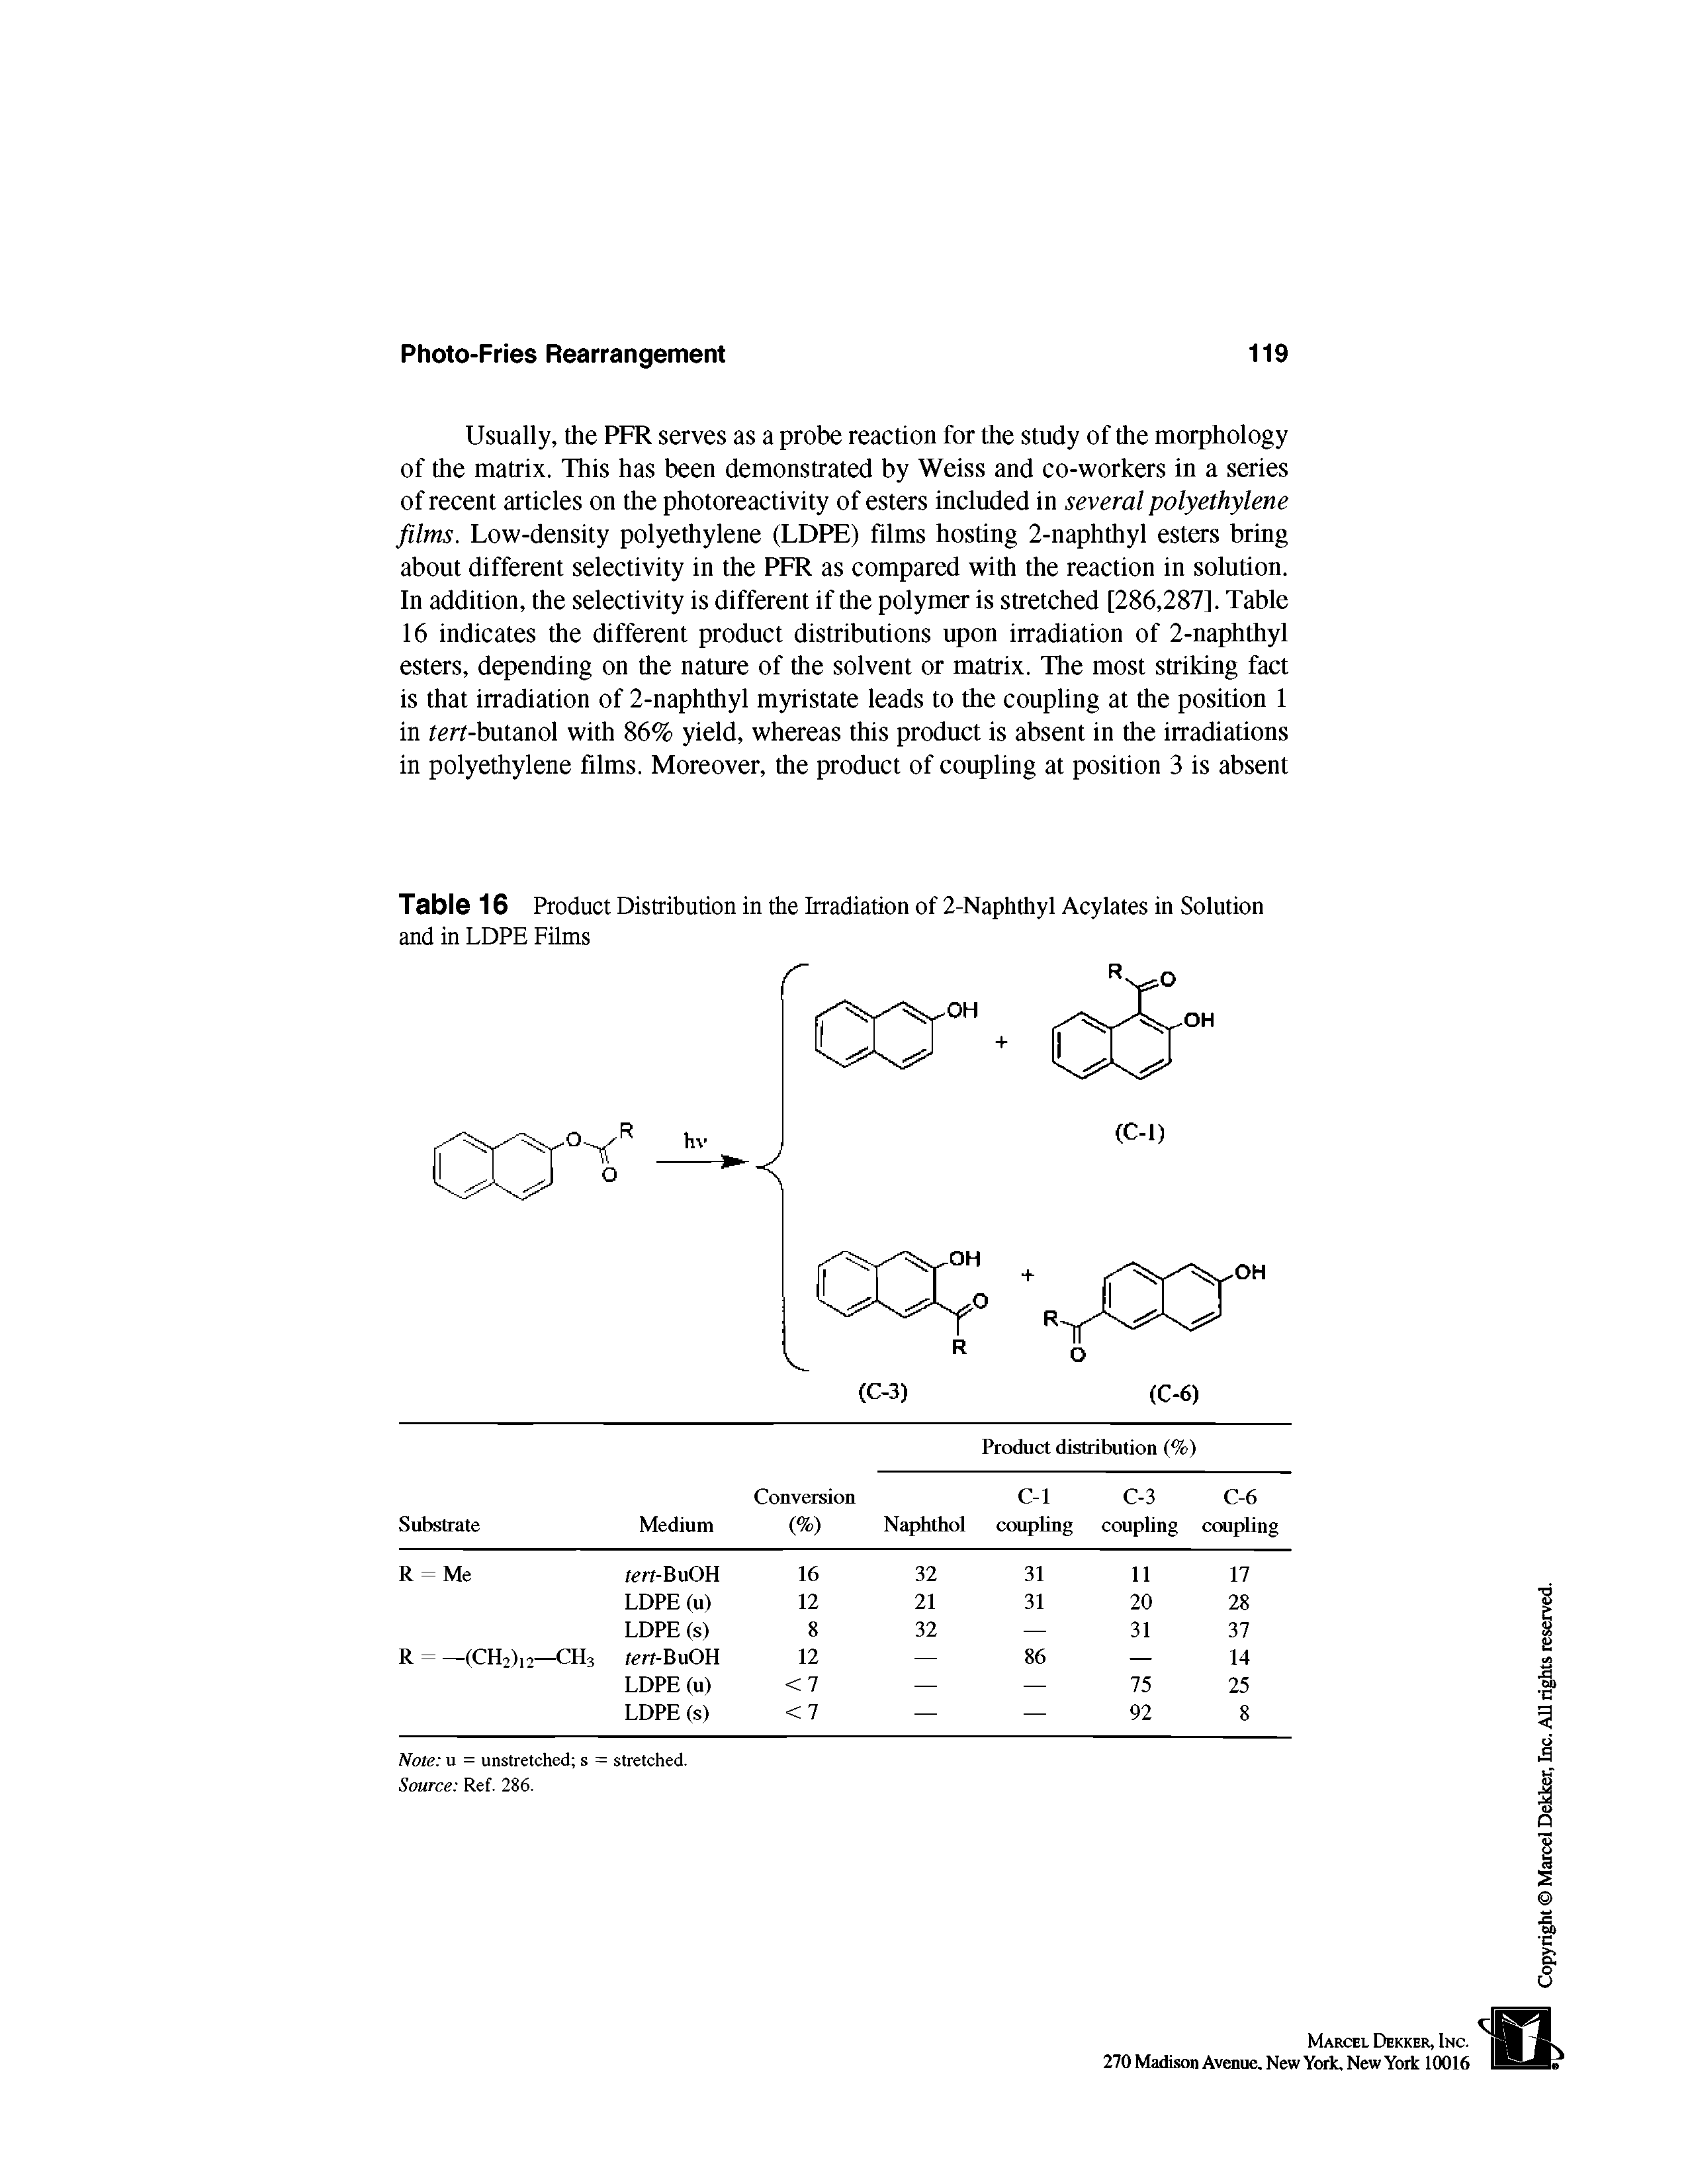 Table 16 Product Distribution in the Irradiation of 2-Naphthyl Acylates in Solution and in LDPE Films...